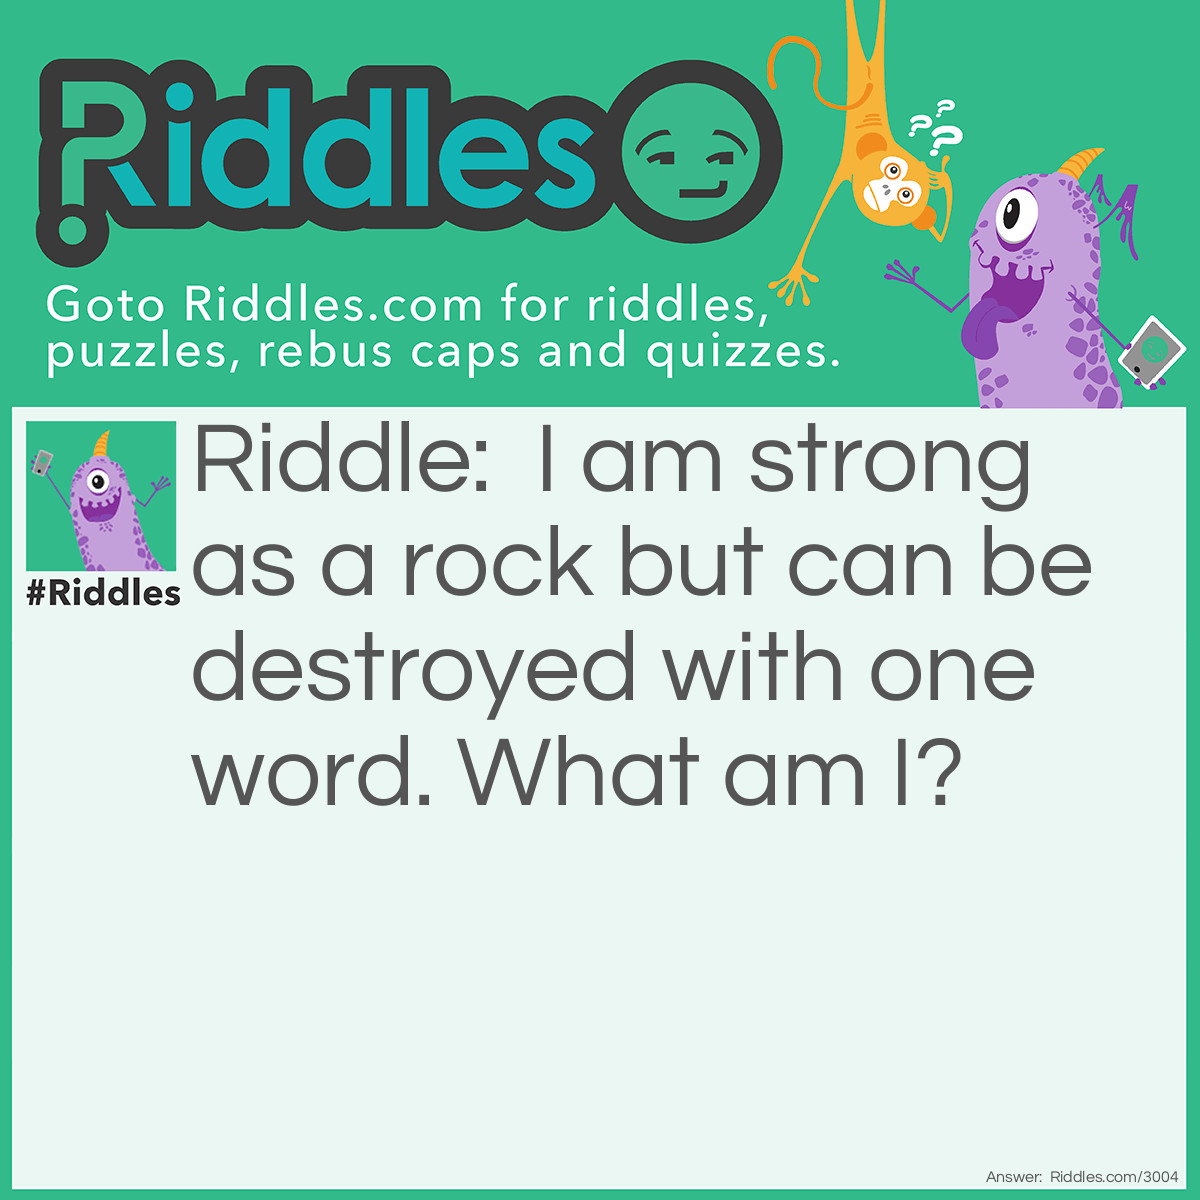 Riddle: I am strong as a rock but can be destroyed with one word. What am I? Answer: Silence.